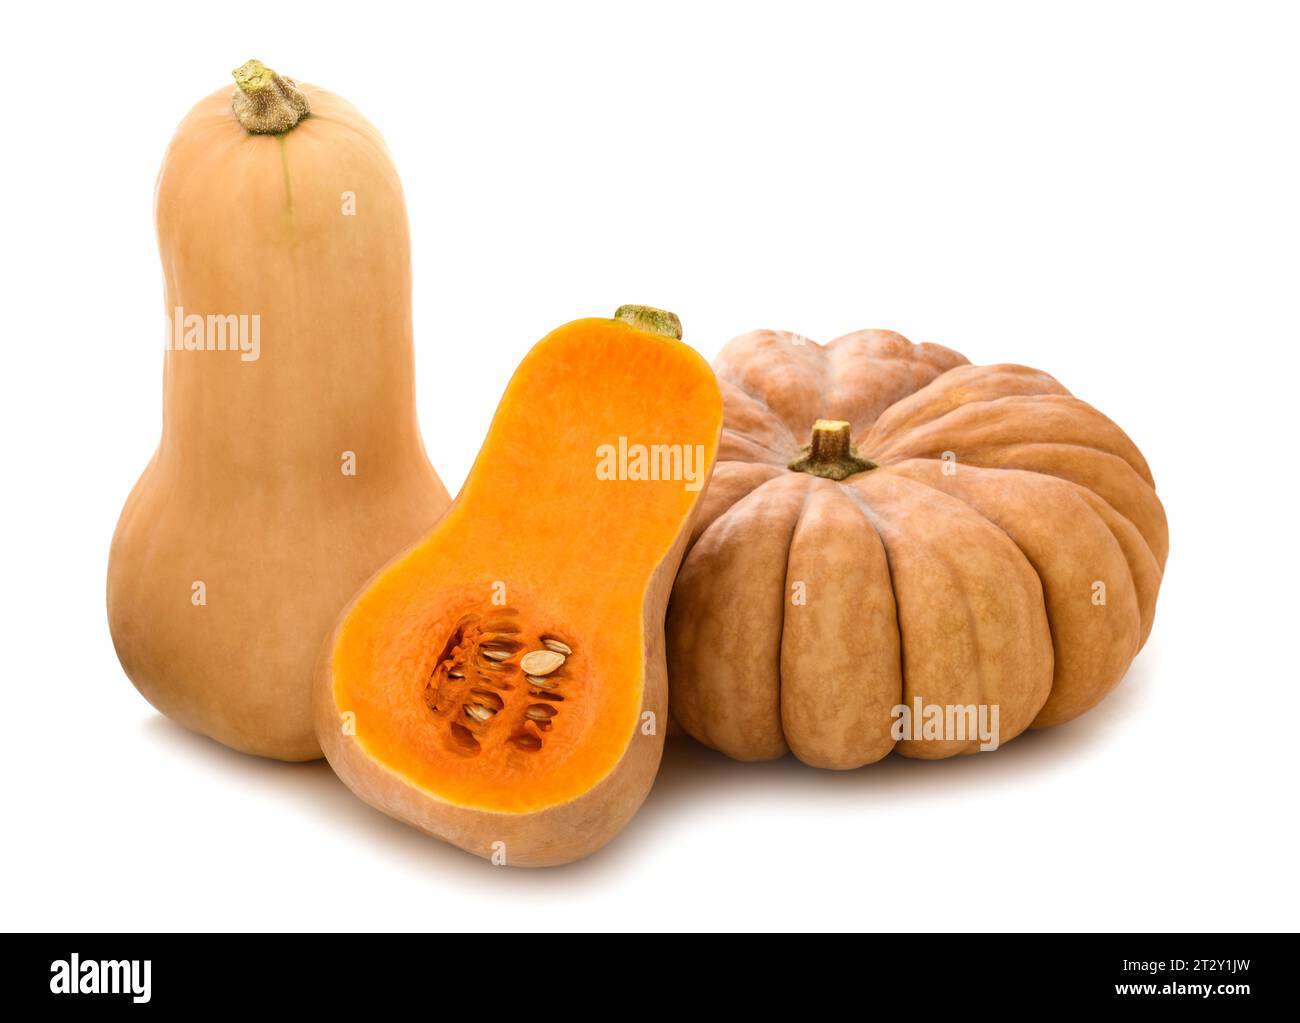 Pumpkins group isolated on white background Stock Photo